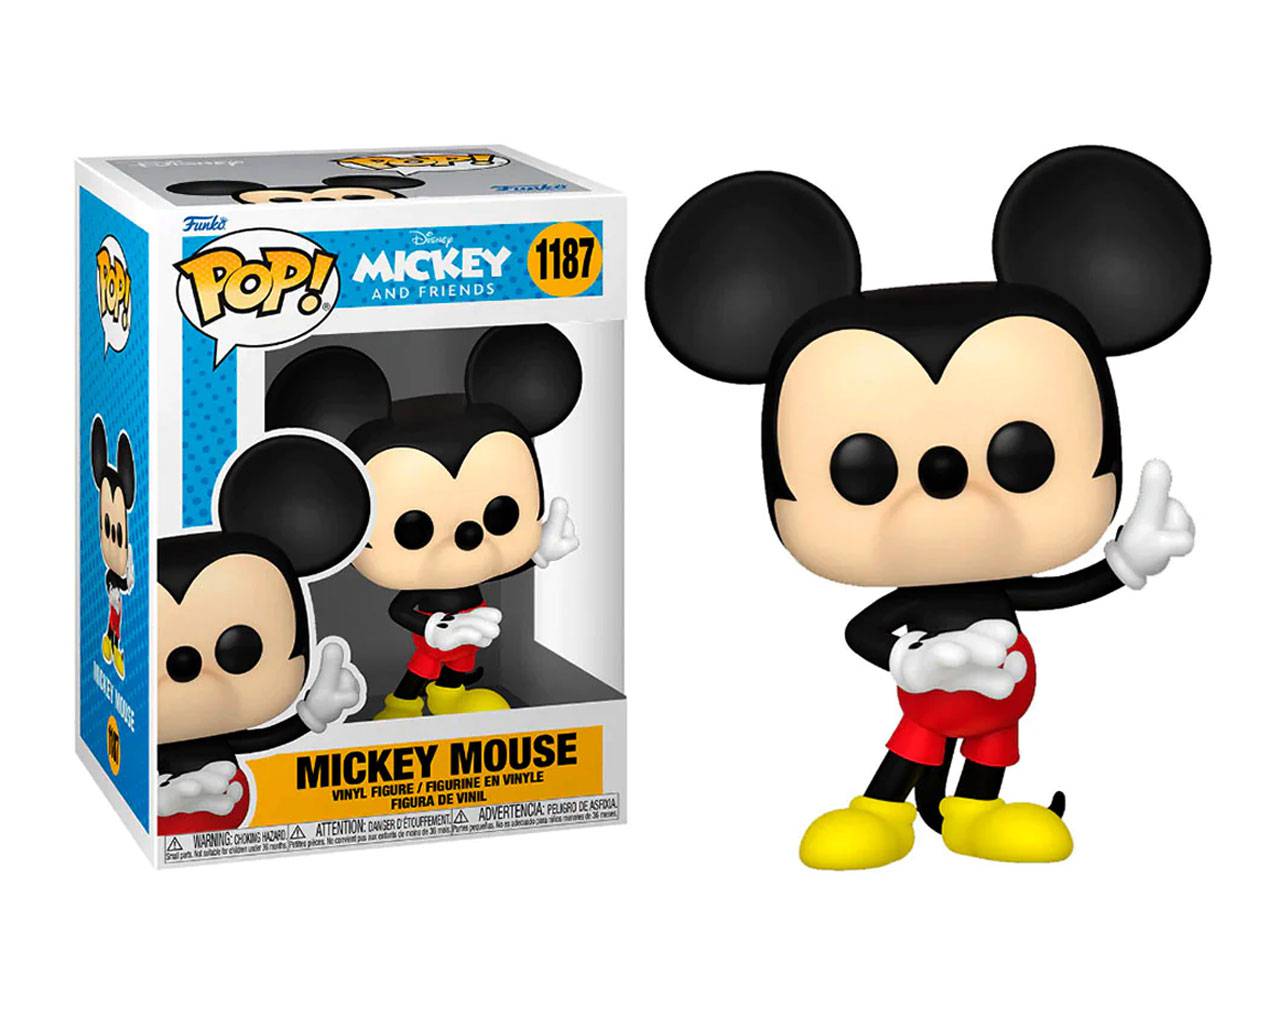 Mickey Mouse (Have an idea) - Mickey and Friends Pop! Vinyl